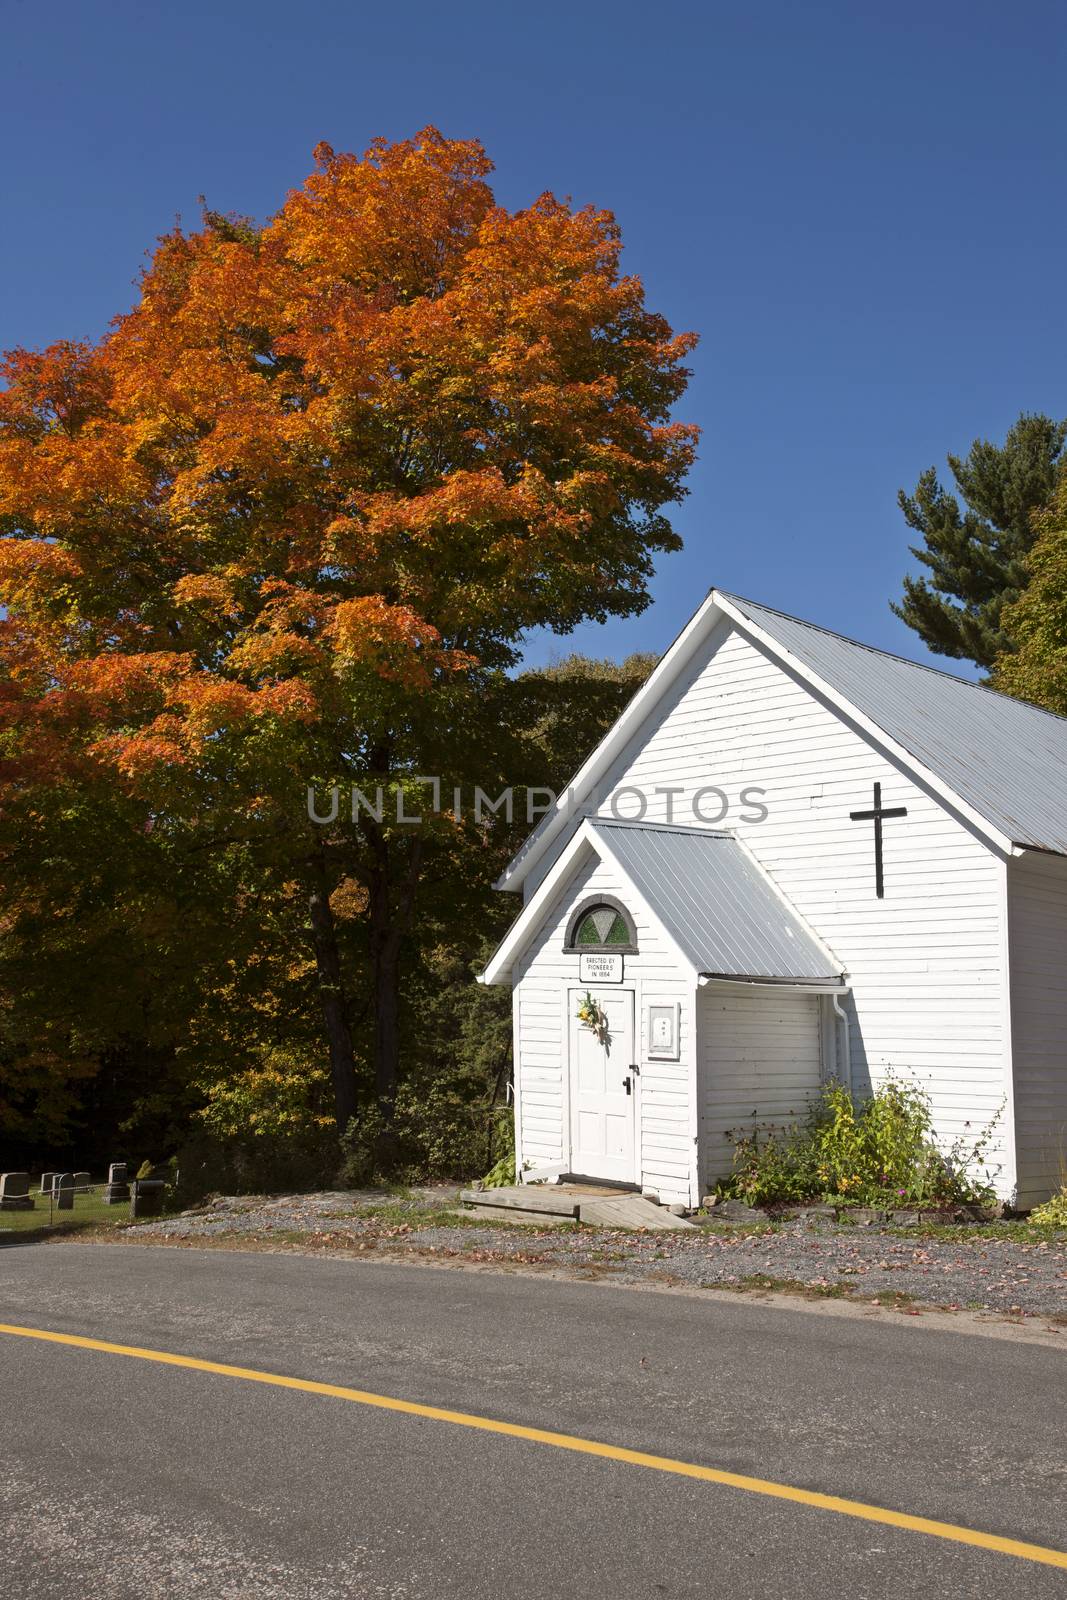 Old Country Church in Autumn by pictureguy